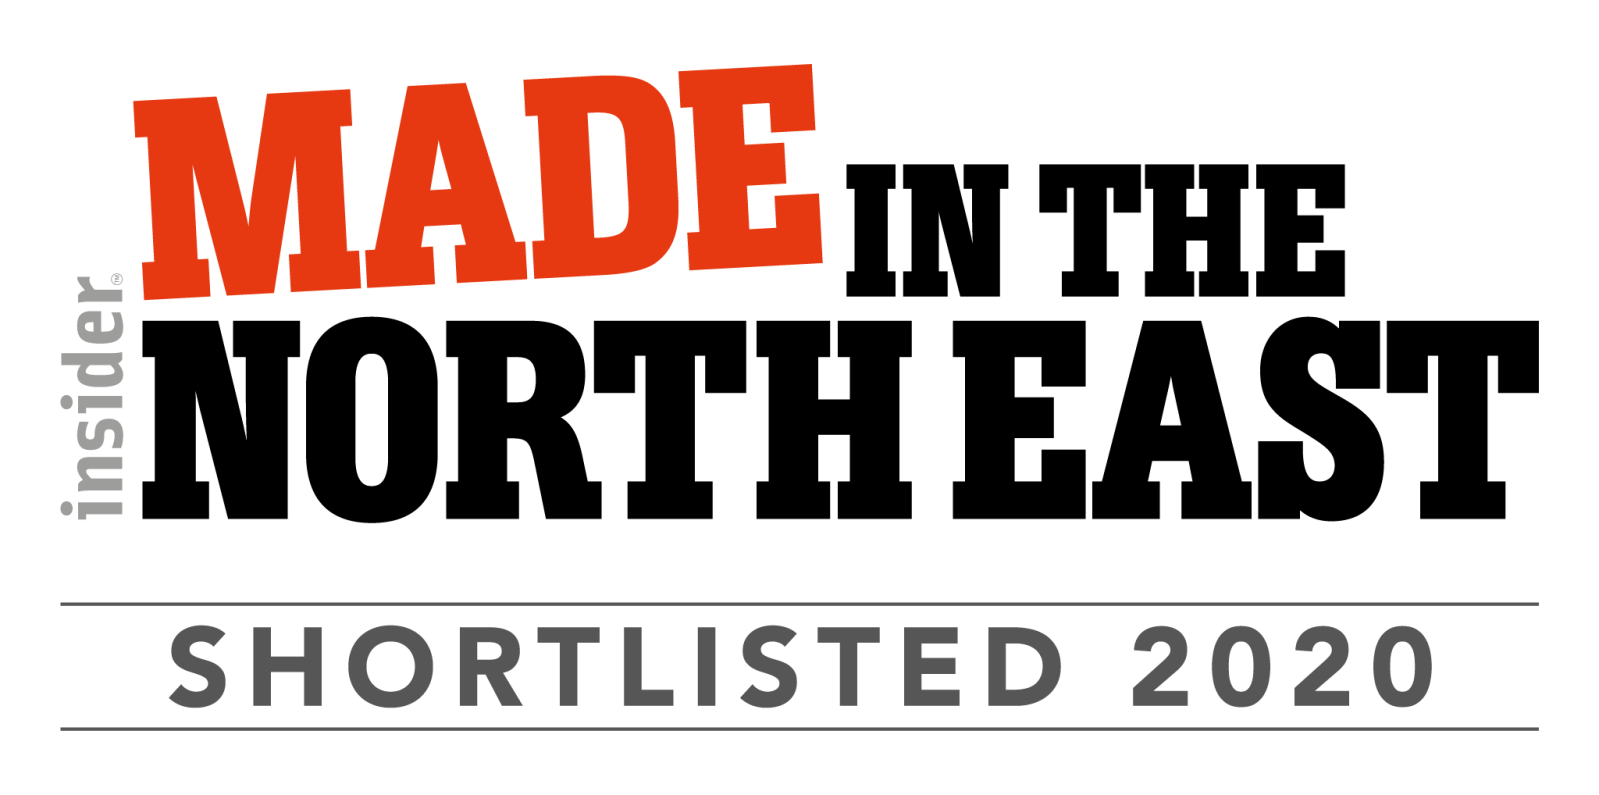 The Expanded Metal Company is shortlisted for prestigious innovation award